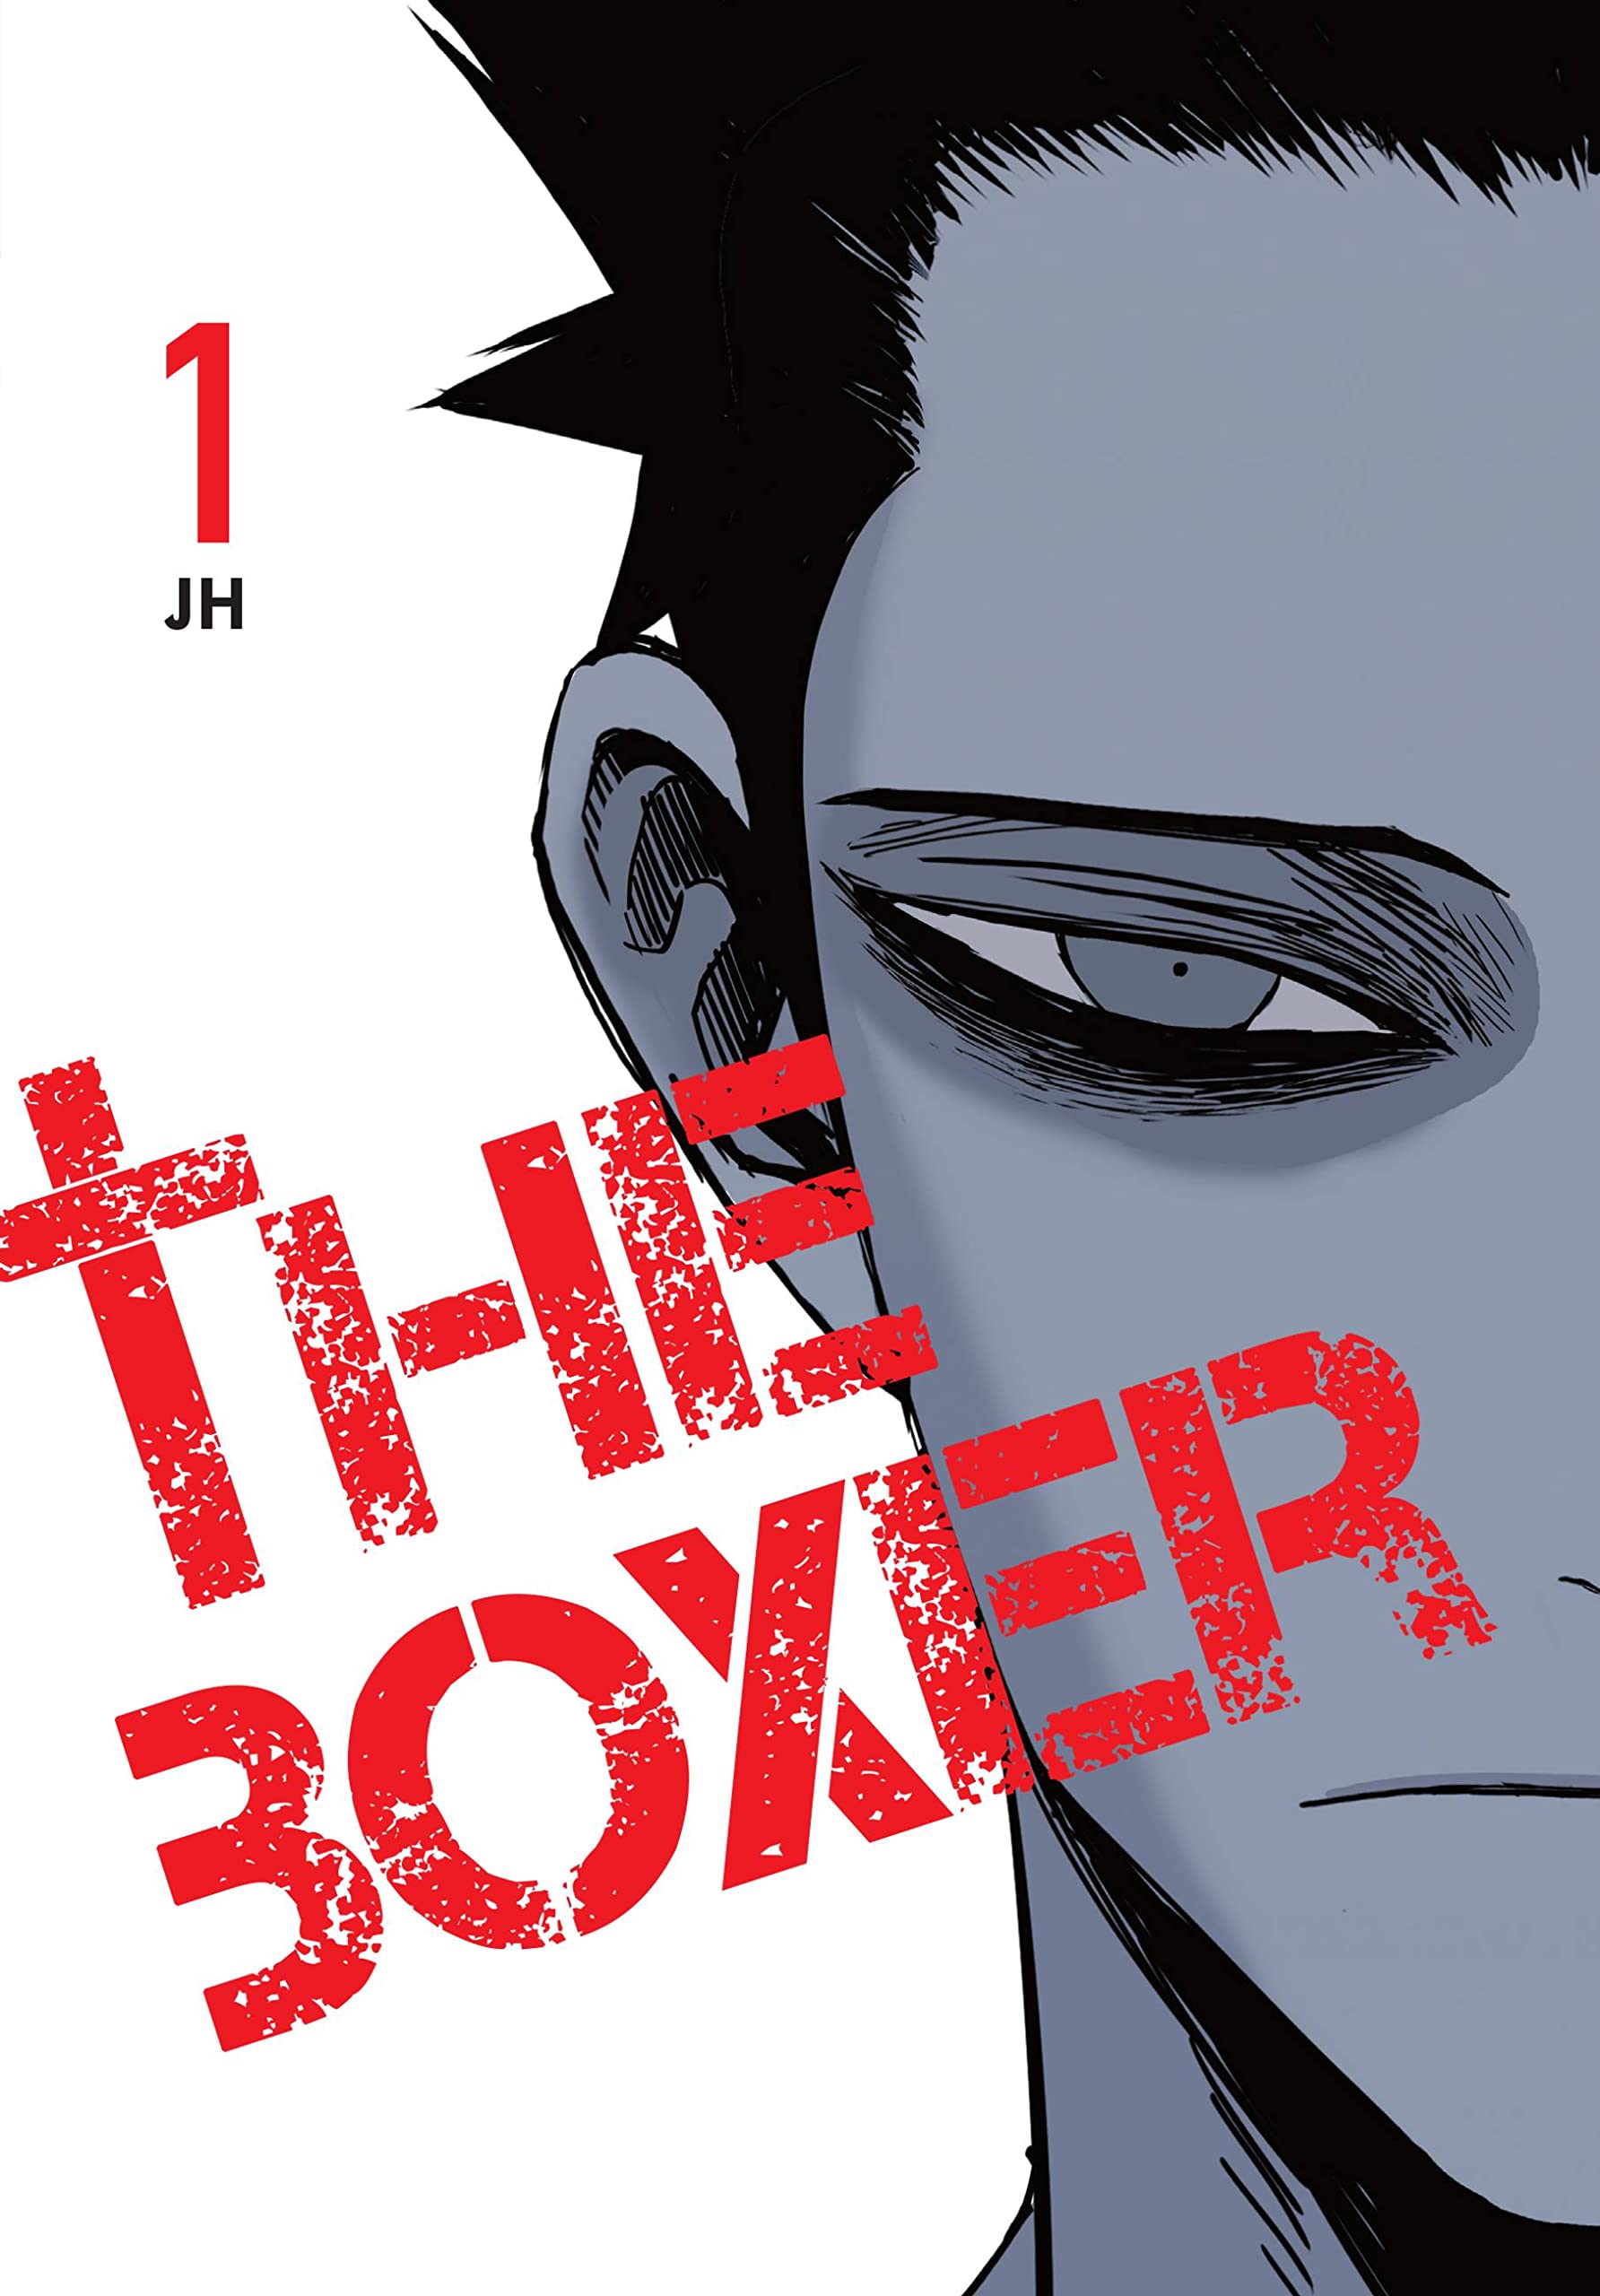 Ep. 95: The Boxer, by JH